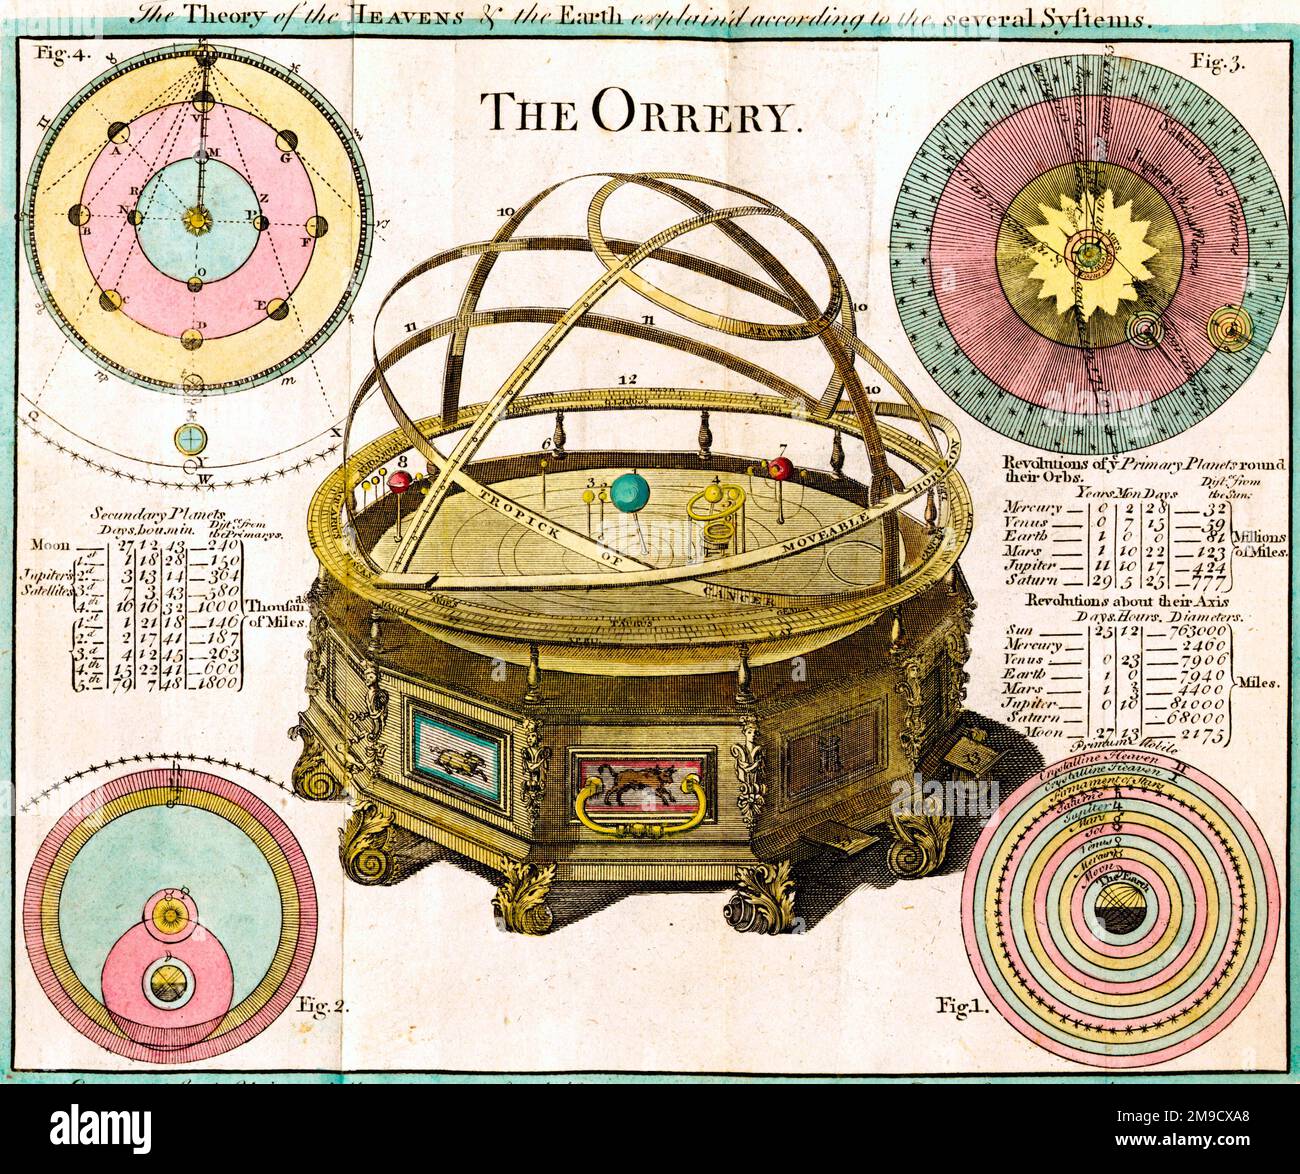 The Orrery, Heliocentric model of the Solar System. The Theory of the Heavens & the Earth explain'd according to the several Systems. Stock Photo